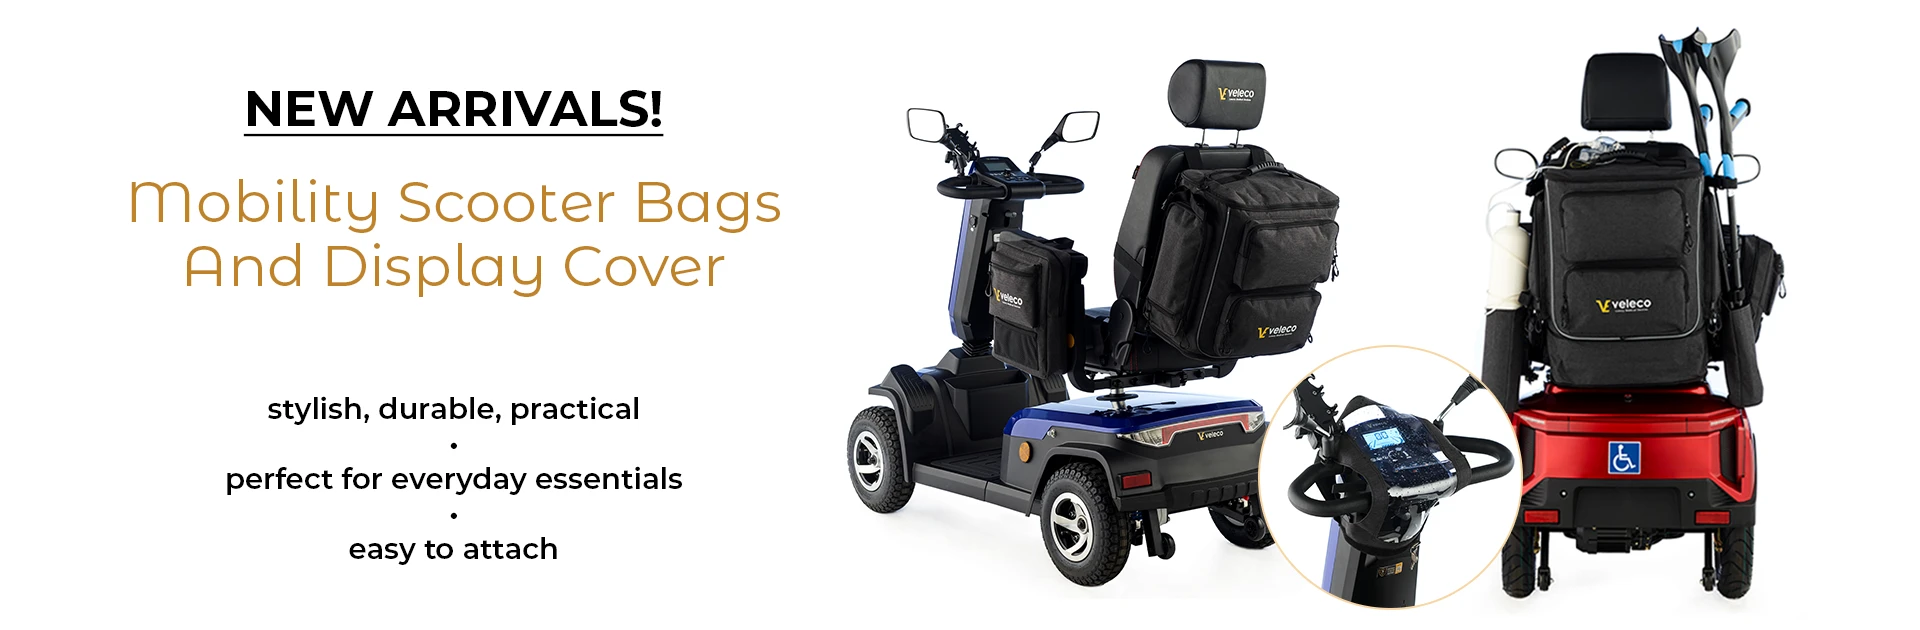 Veleco bags for mobility scooters